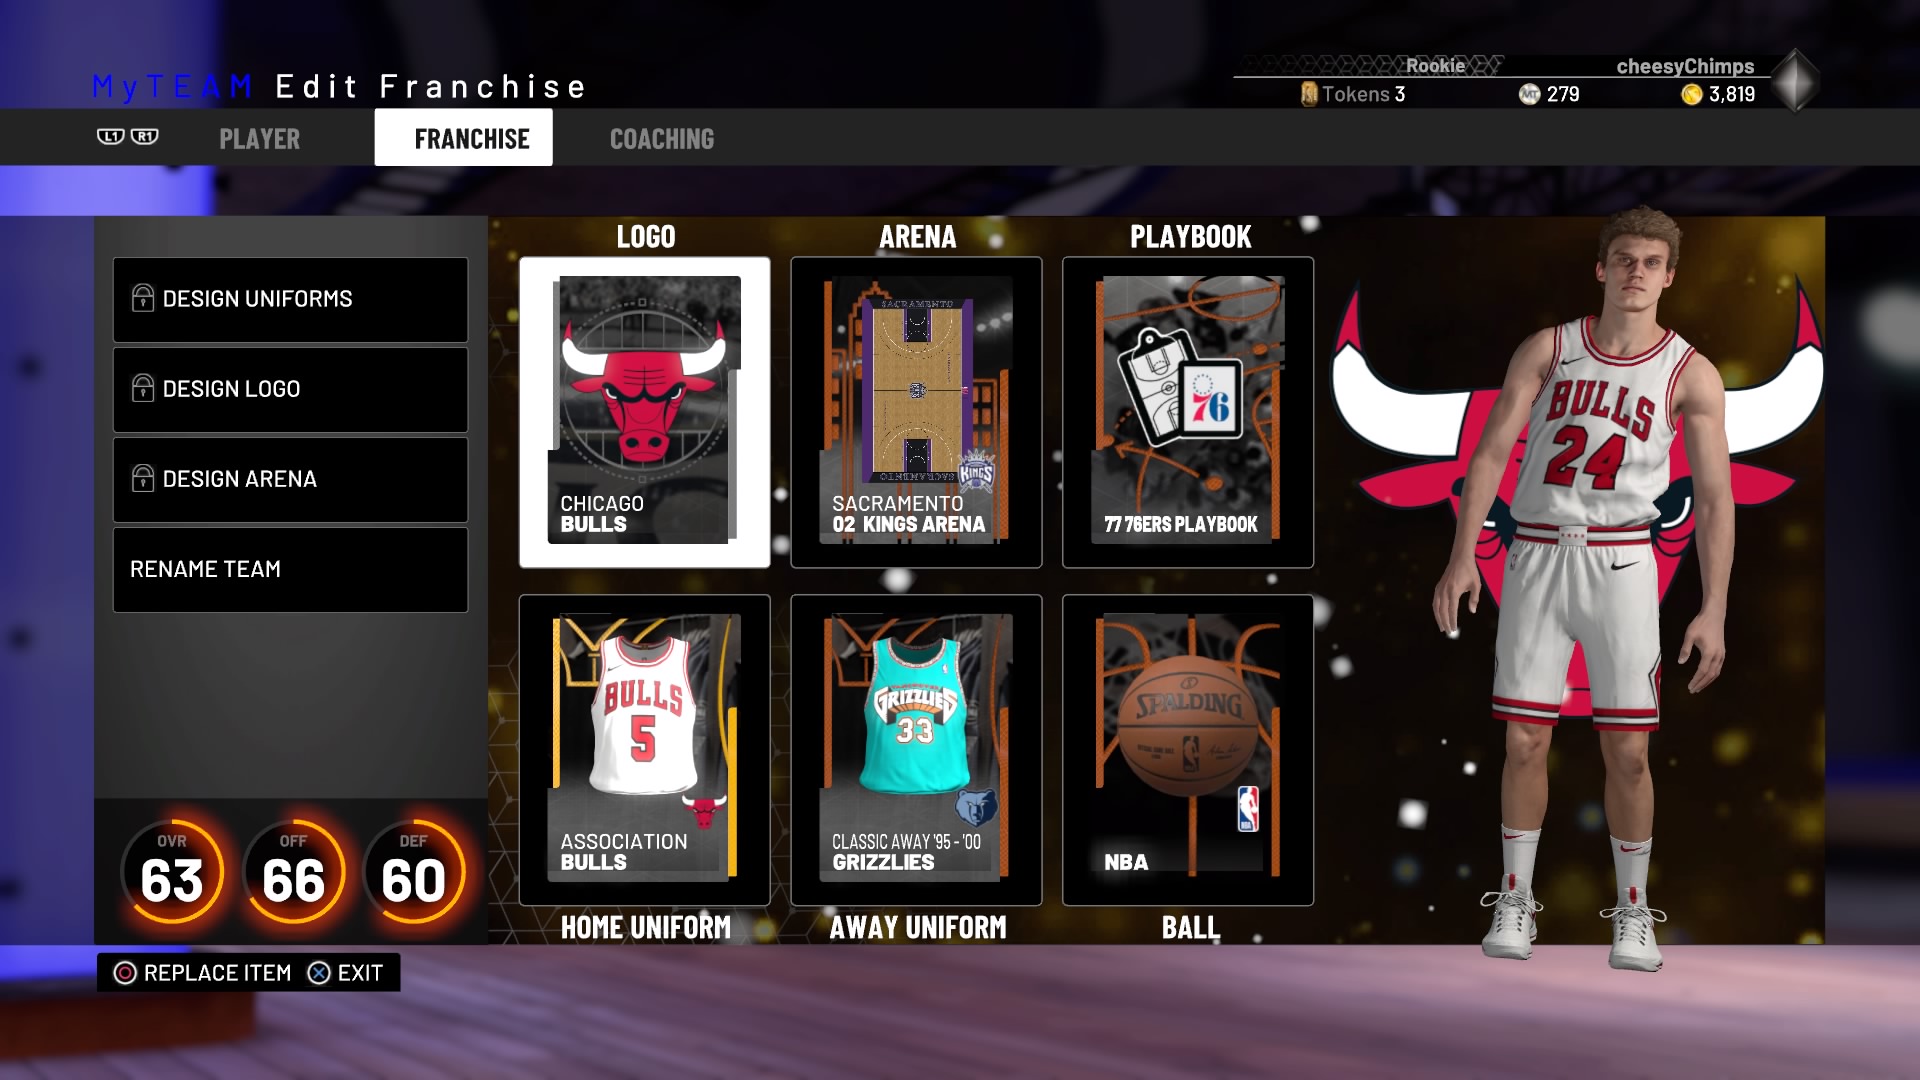 HOW TO FIND STAGE, BARBERSHOP, SHOPPING CENTER, VC MANAGER, THE REC, MY  TEAM, AND MORE IN NBA 2K22 